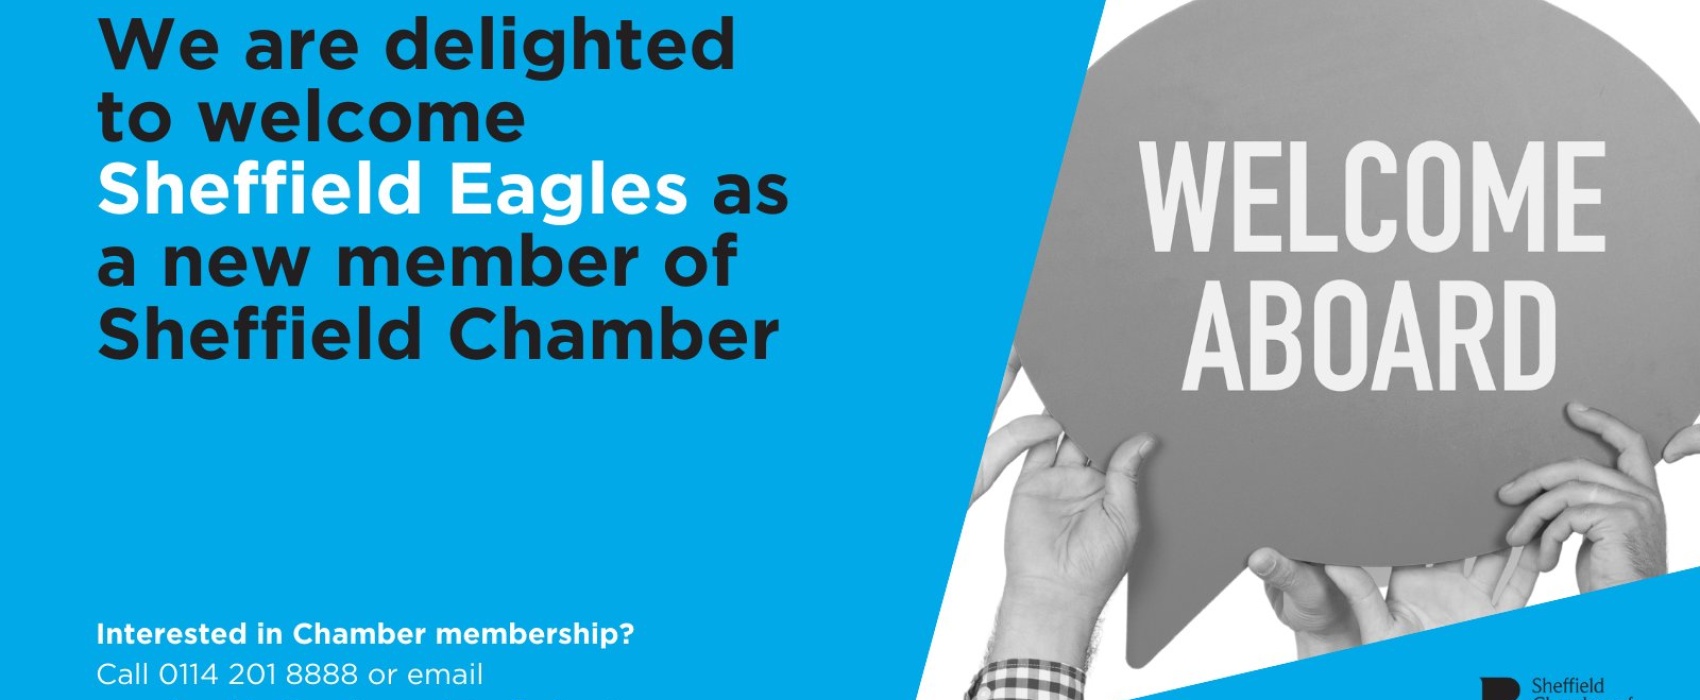 Eagles join Sheffield Chamber of Commerce and Industry